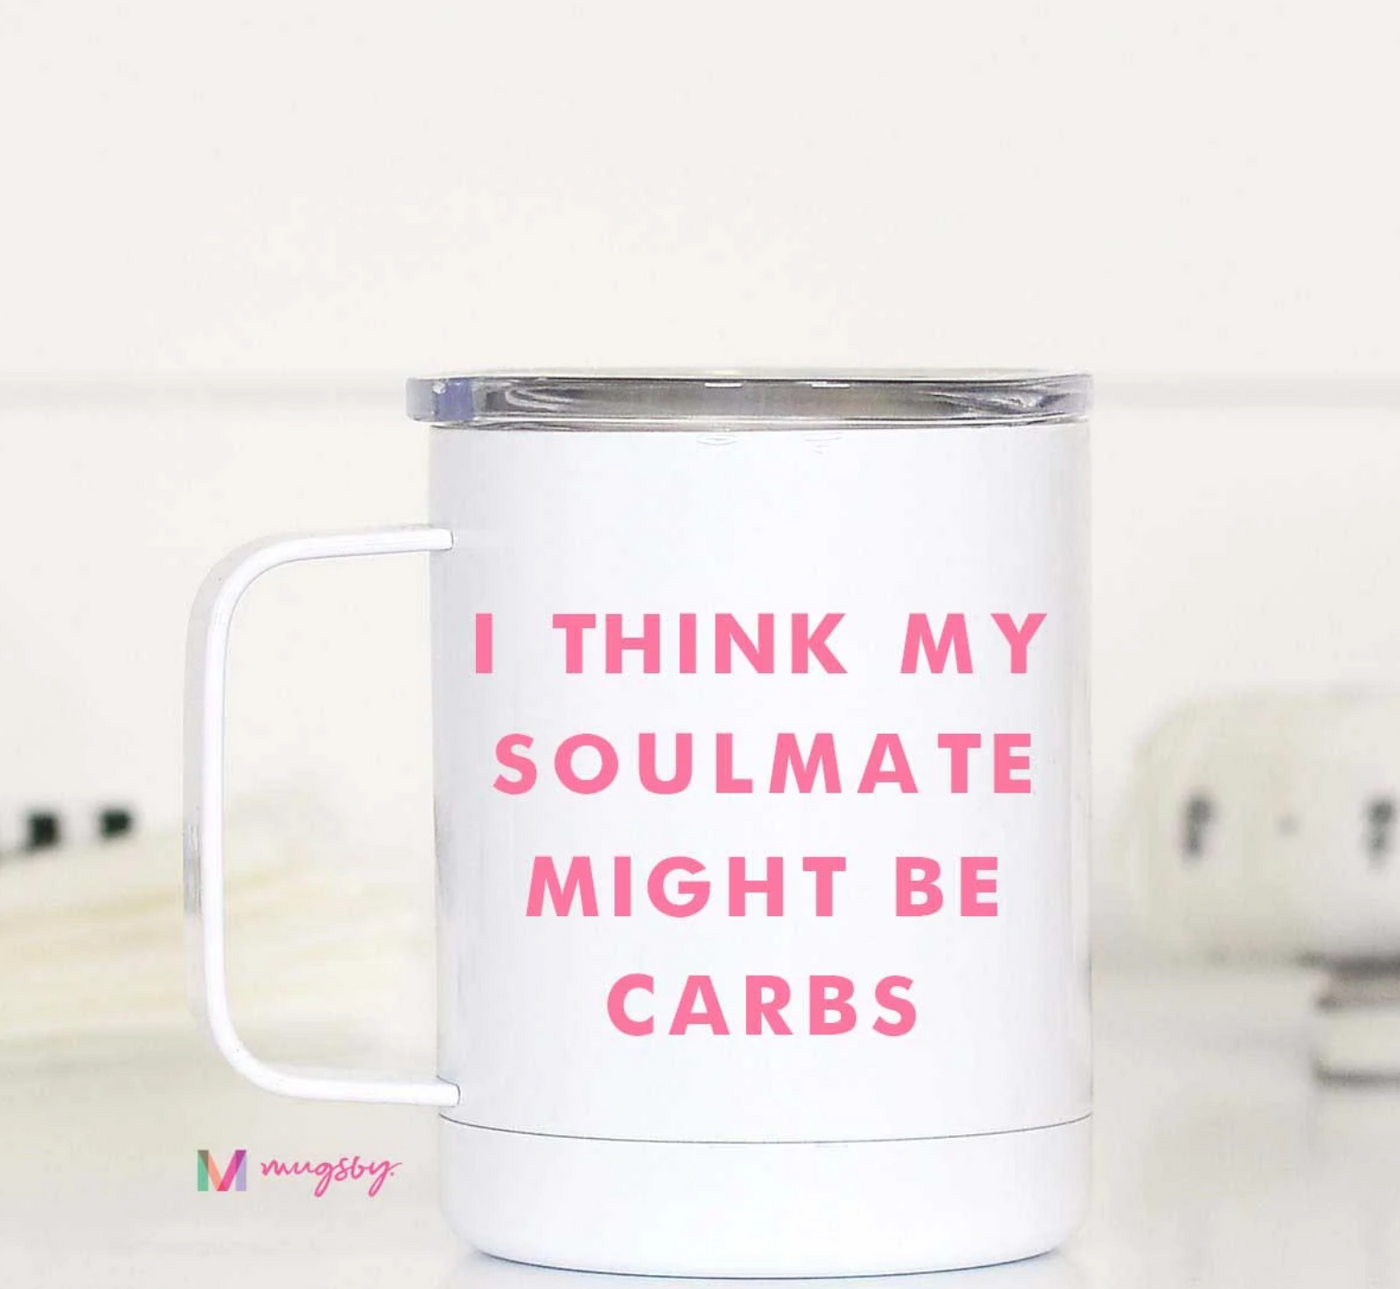 I Think My Soulmate Might Be Carbs Travel Cup With Handle - 12 oz